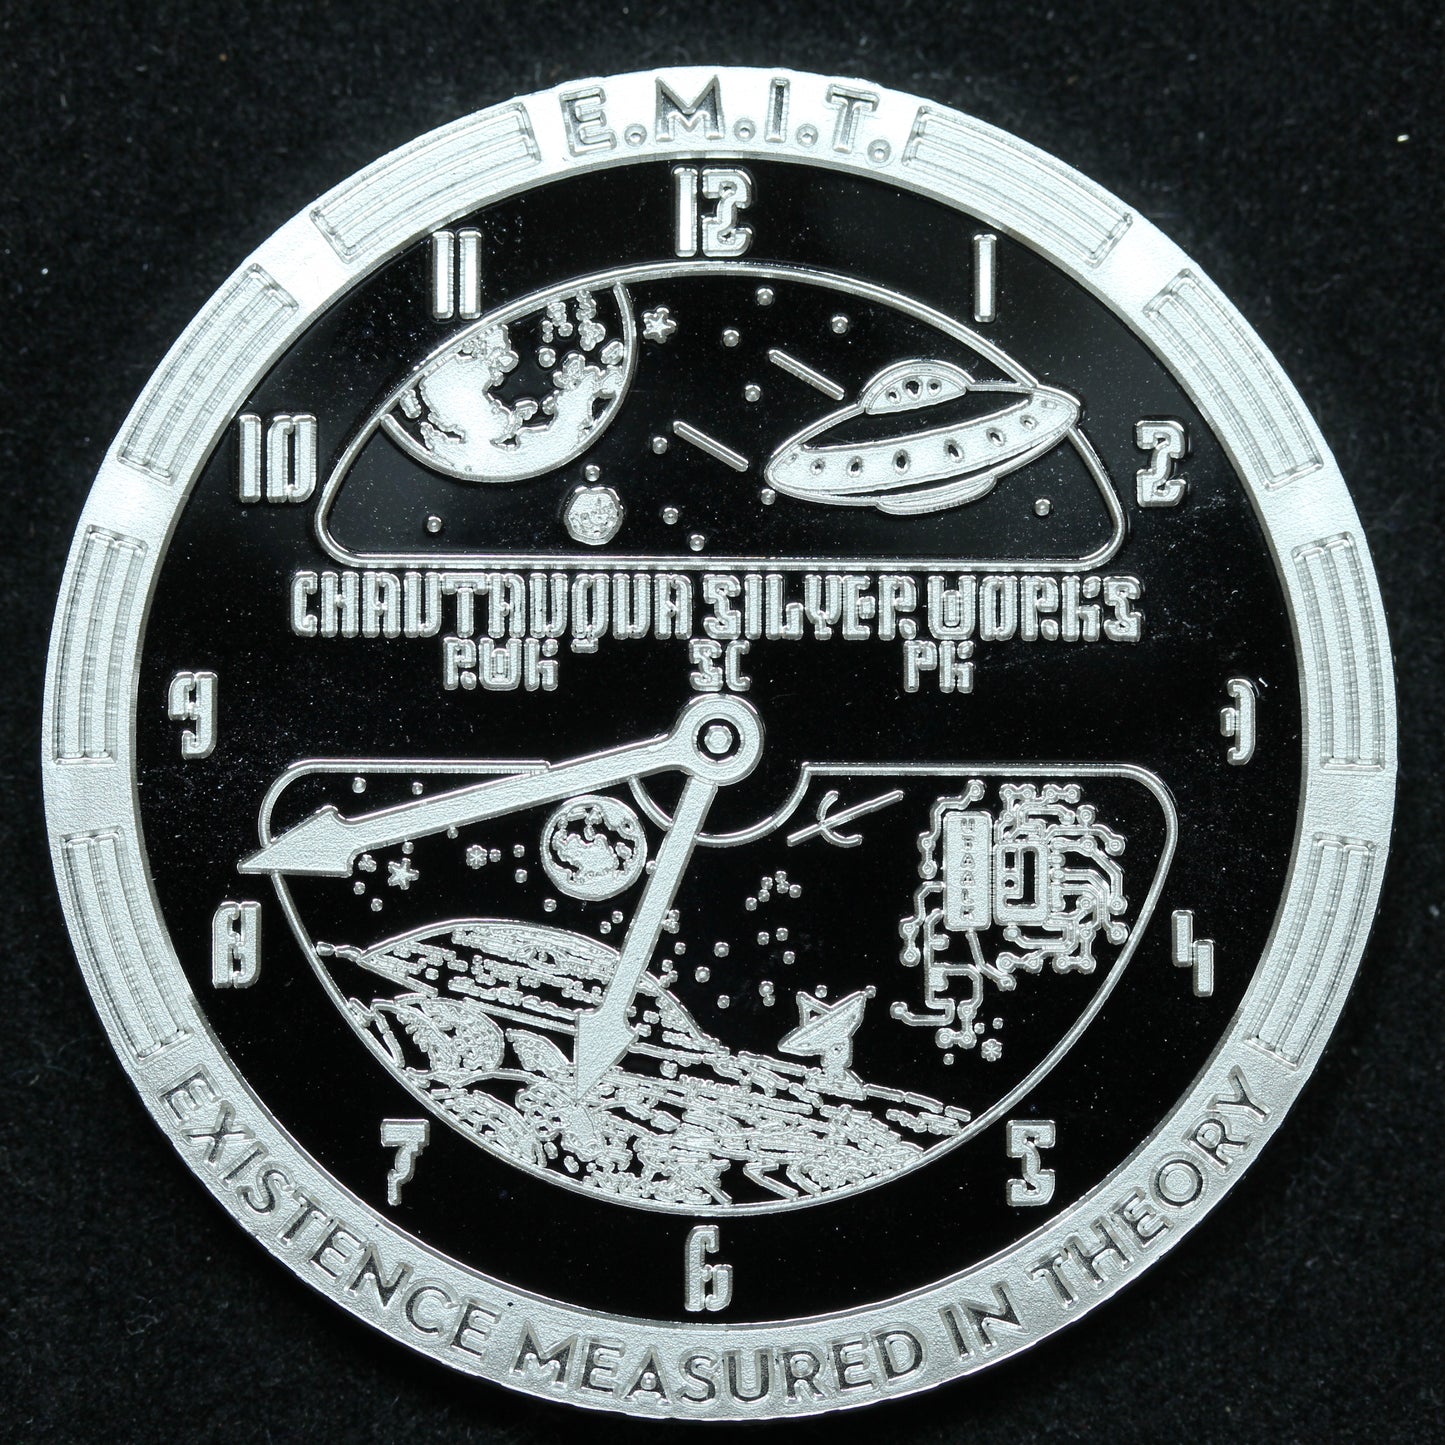 1 oz .999 Fine Silver 'Measuring Existence' TIME Chautauqua Silver Works PROOF